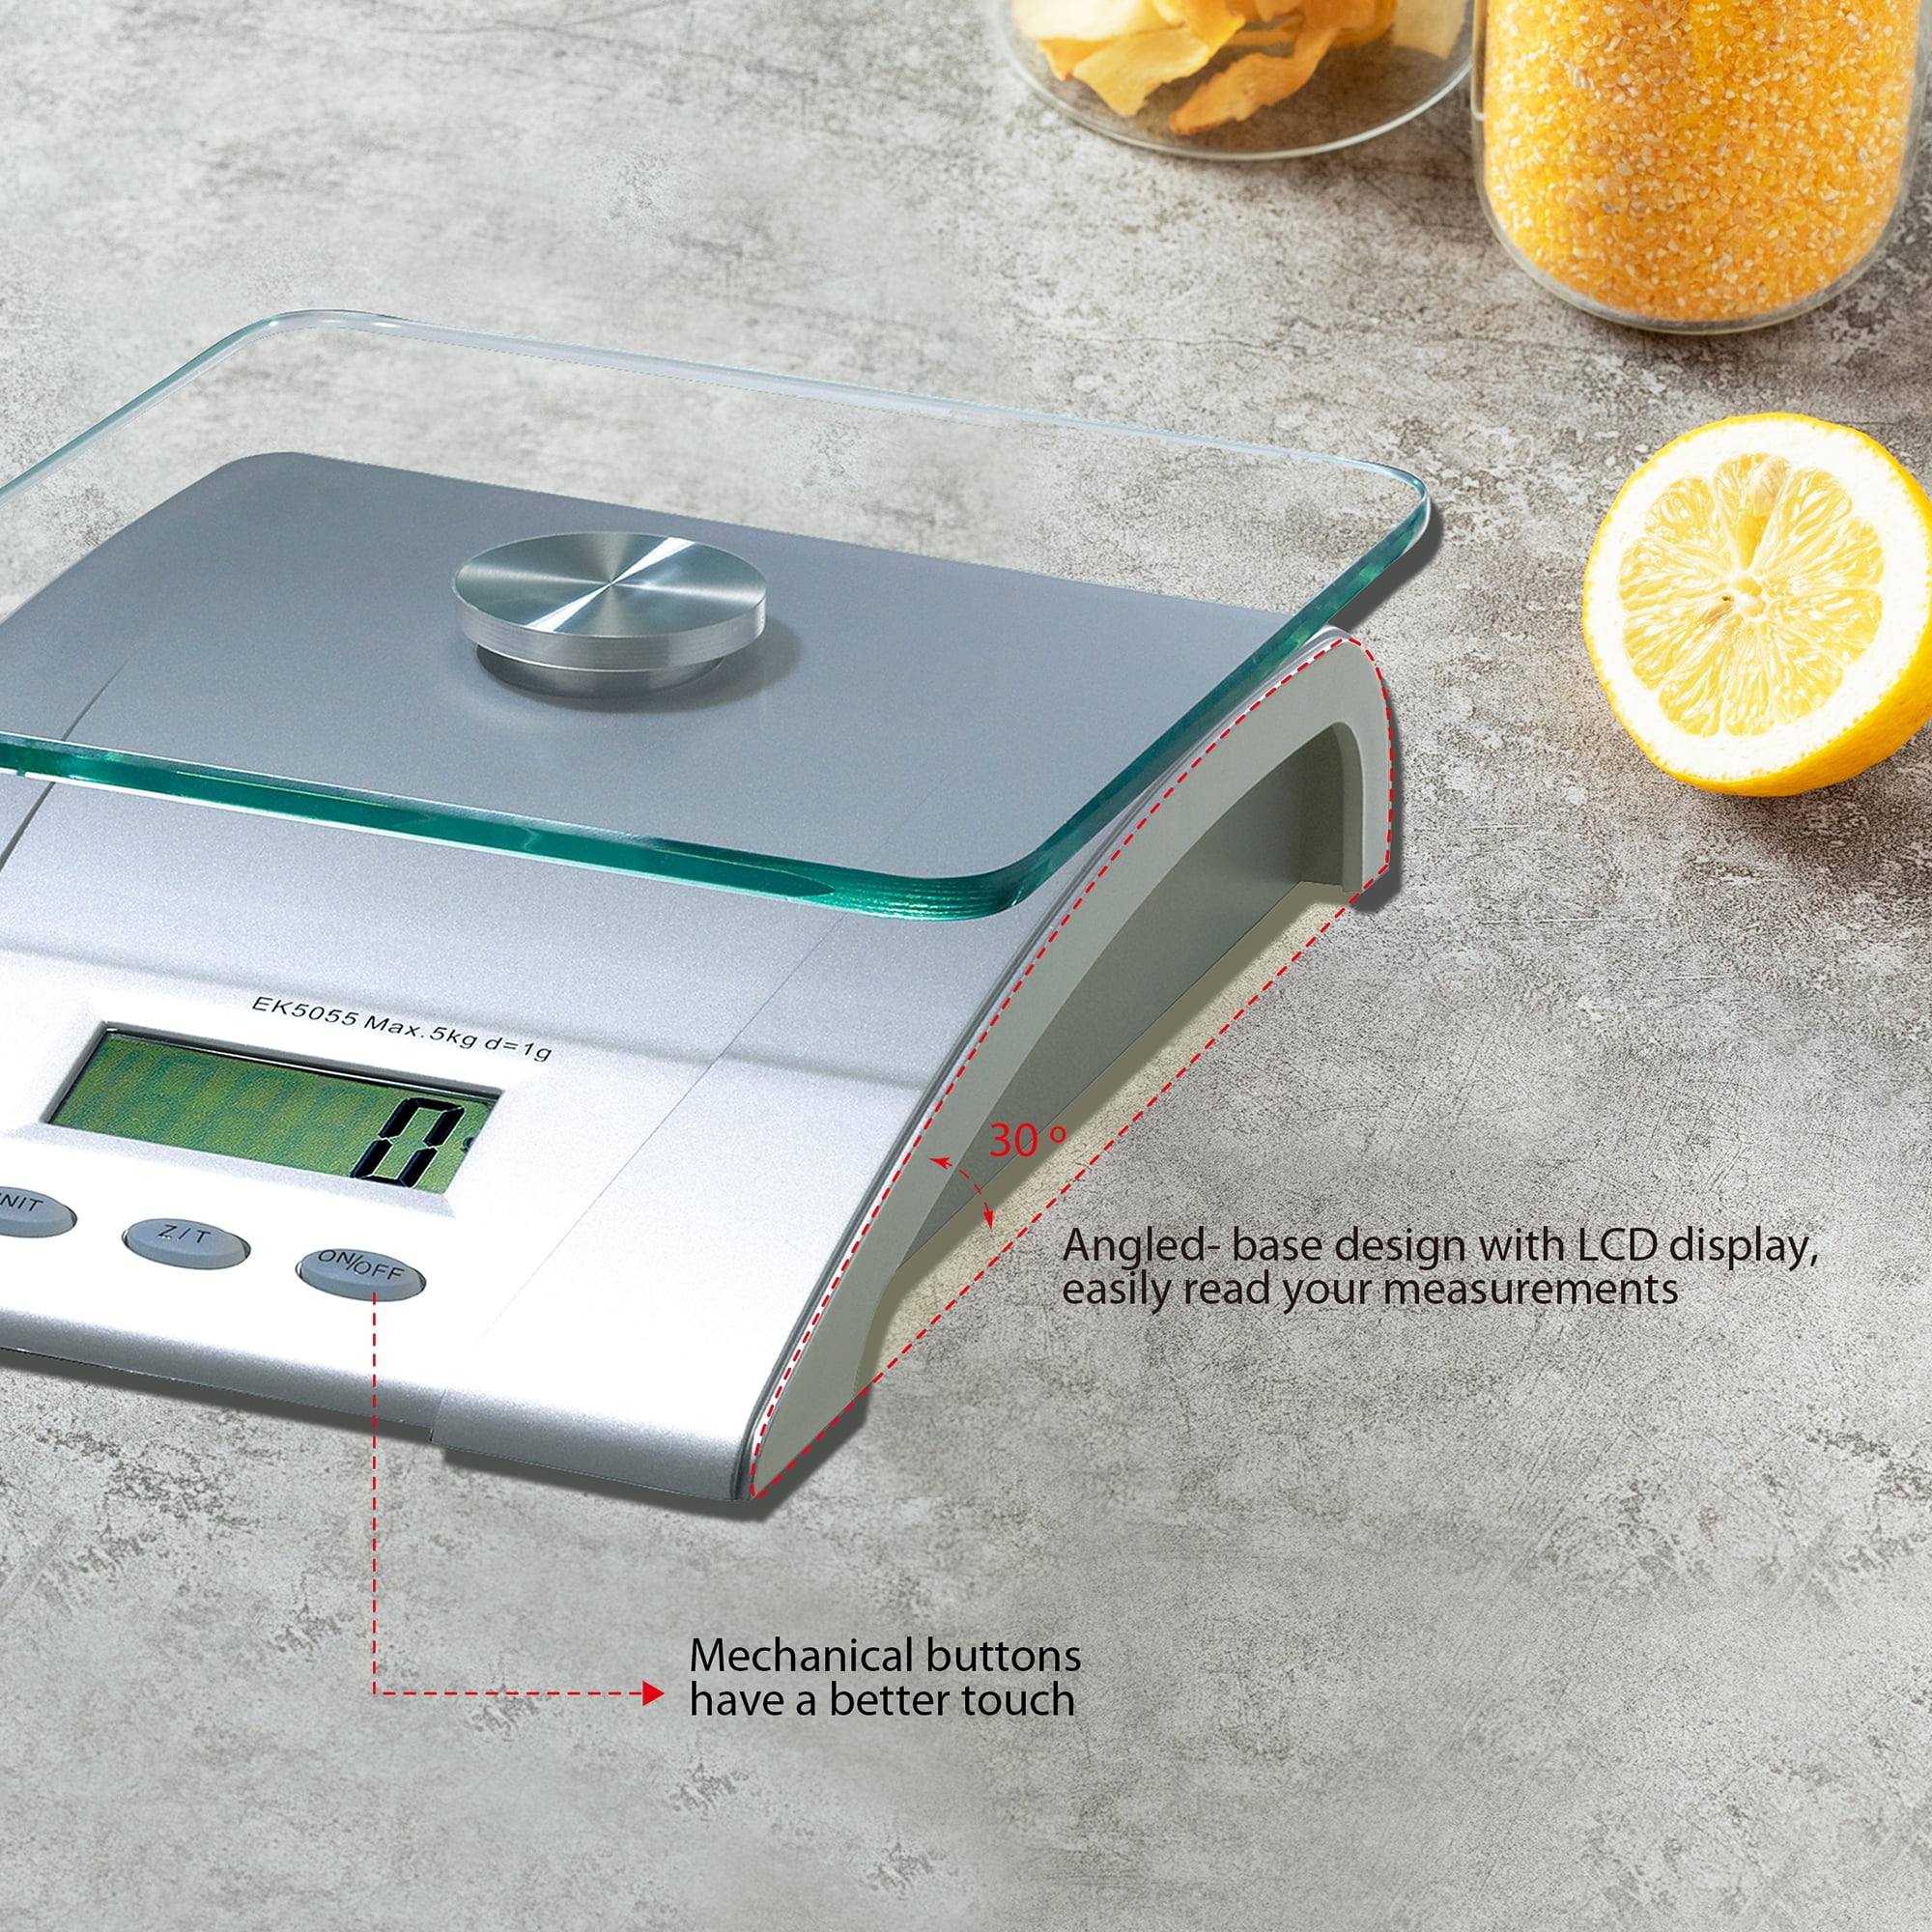 Duronic KS875 Slim Black Glass Surface Design Digital Display 5 KG / 11 LB  Kitchen Scales with 2 Years Free Warranty